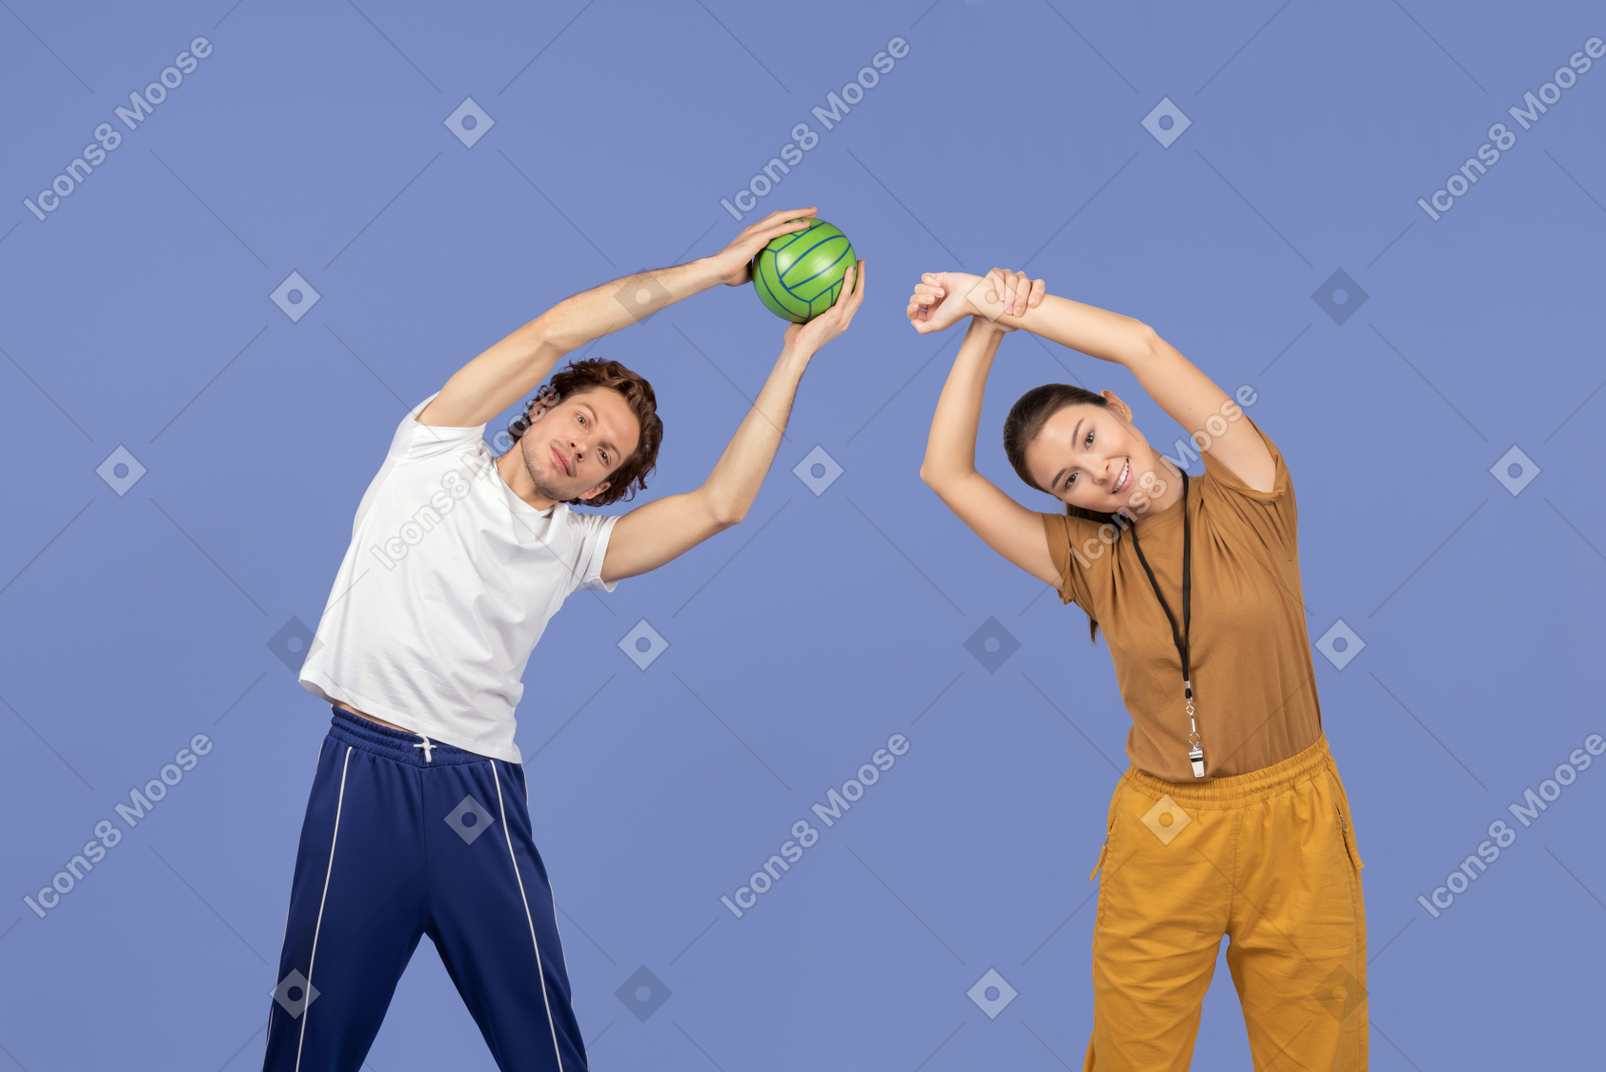 Attractive couple doing an exercise together